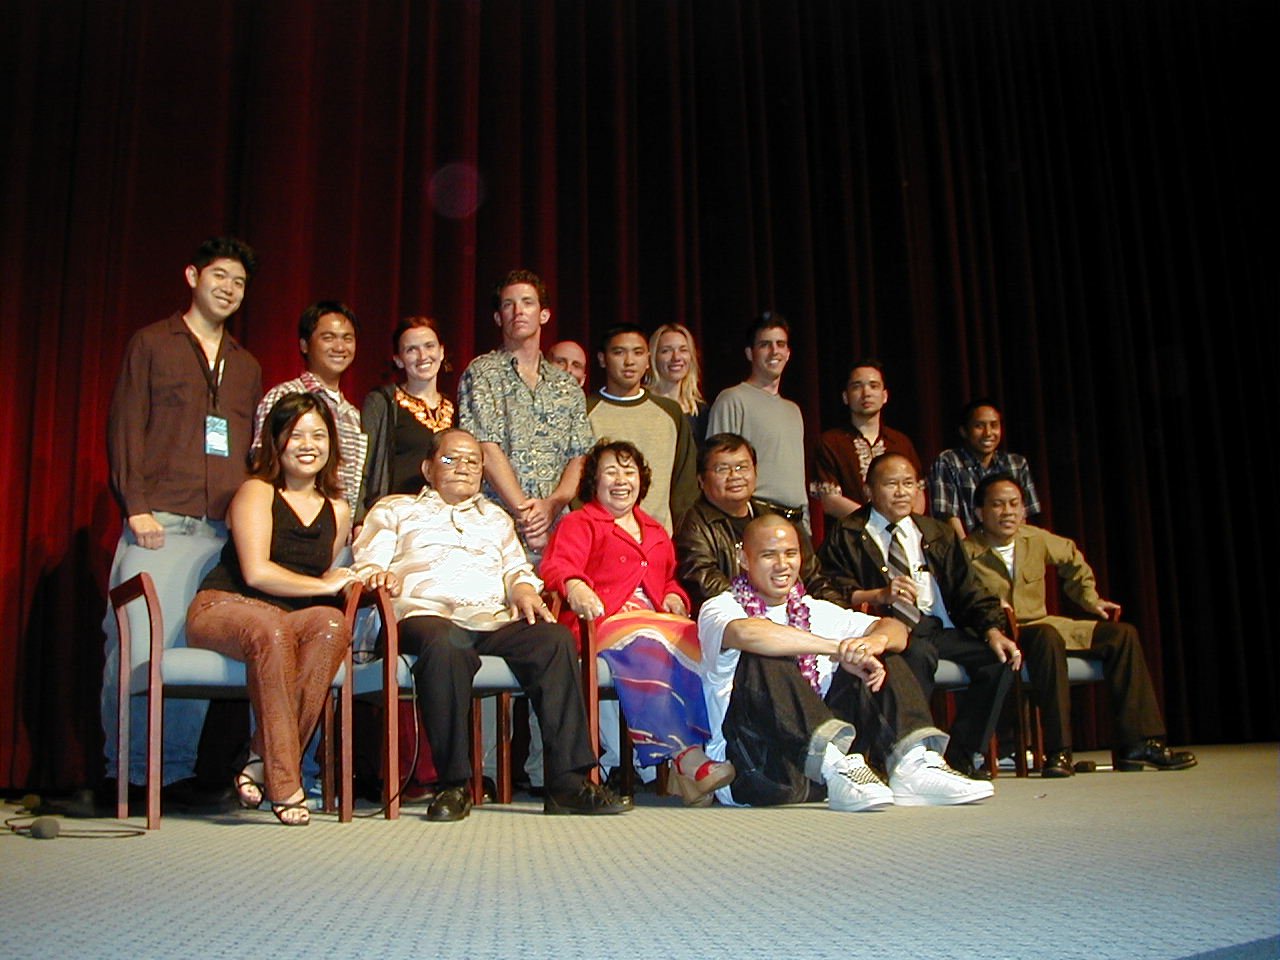 The Flip Side, Movie cast and crew @DGA